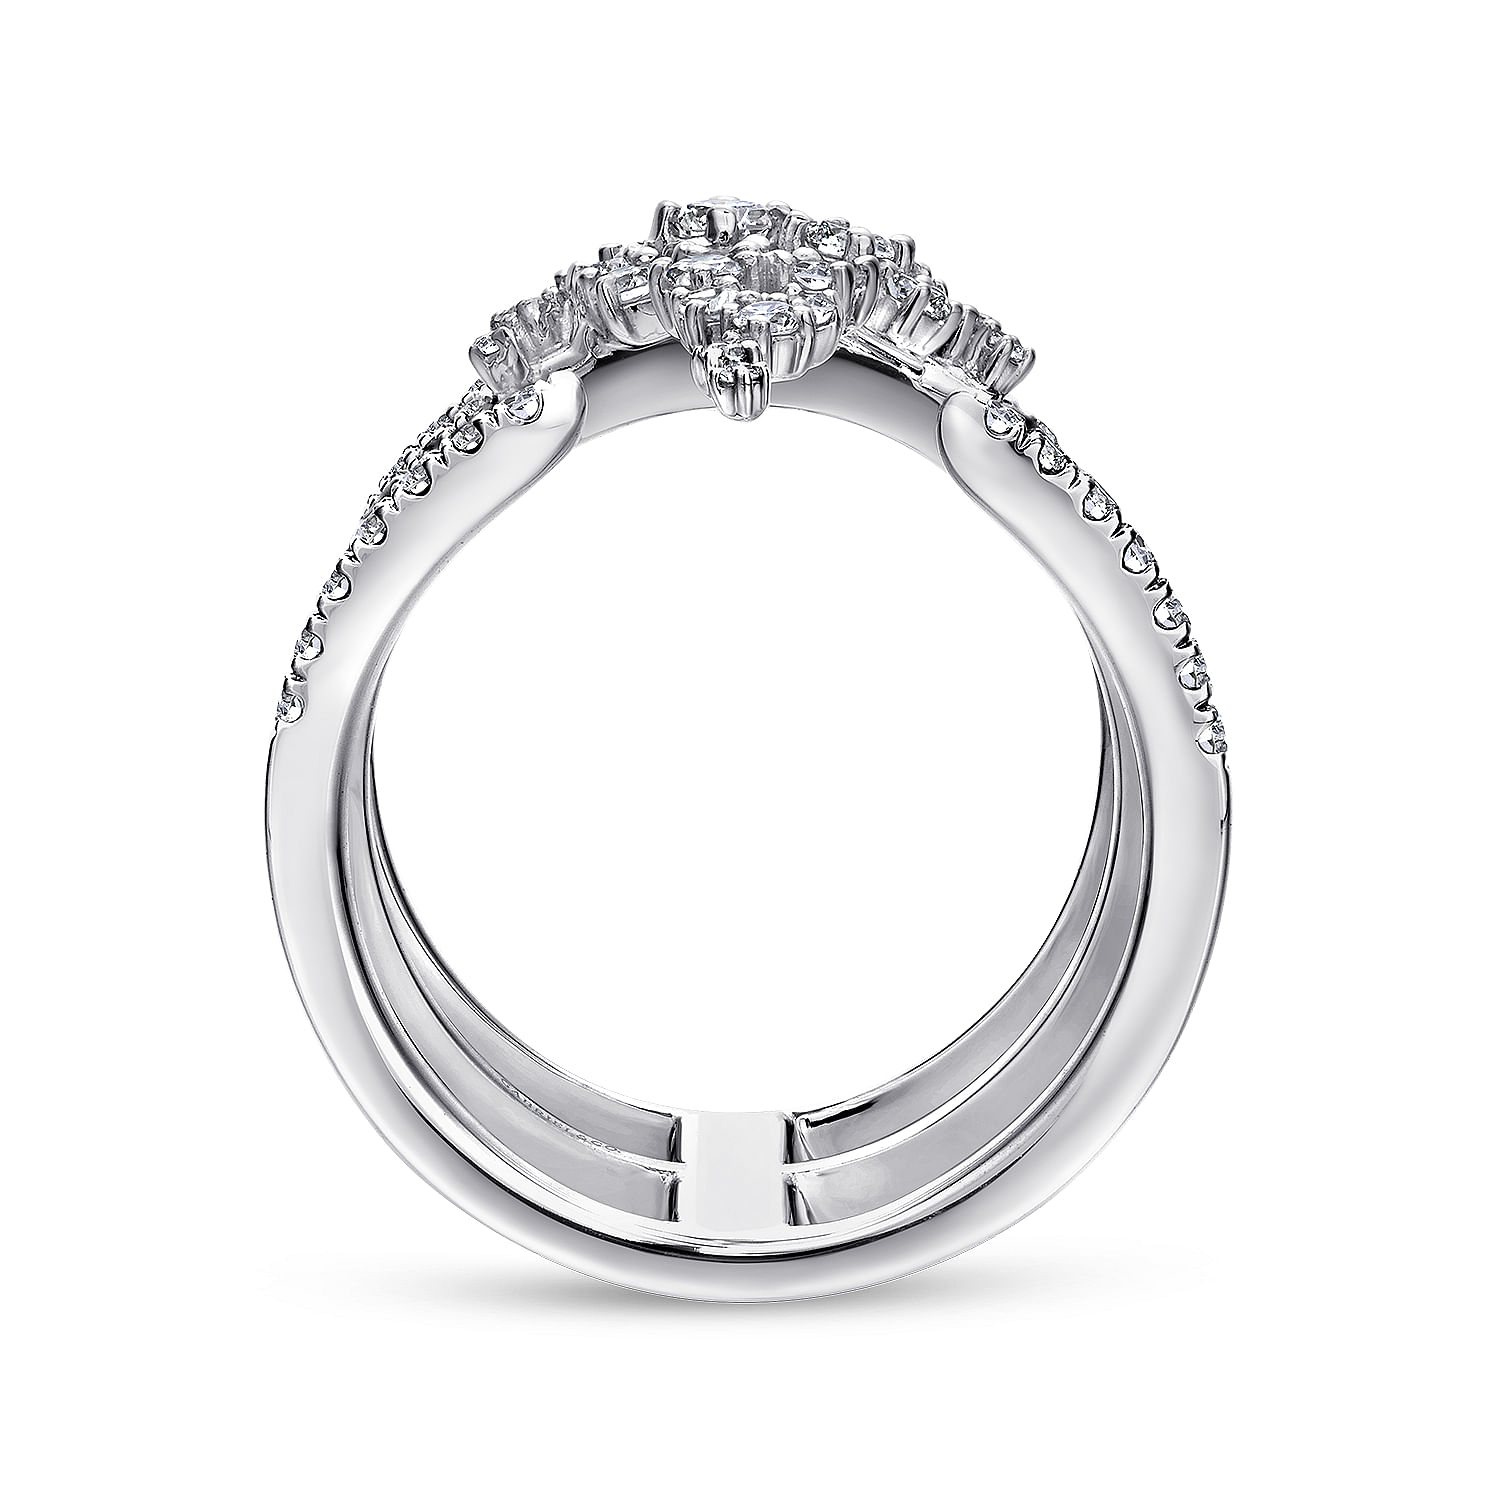 18K White Gold Three Row Open Ring with Pavé Diamond Cluster Center